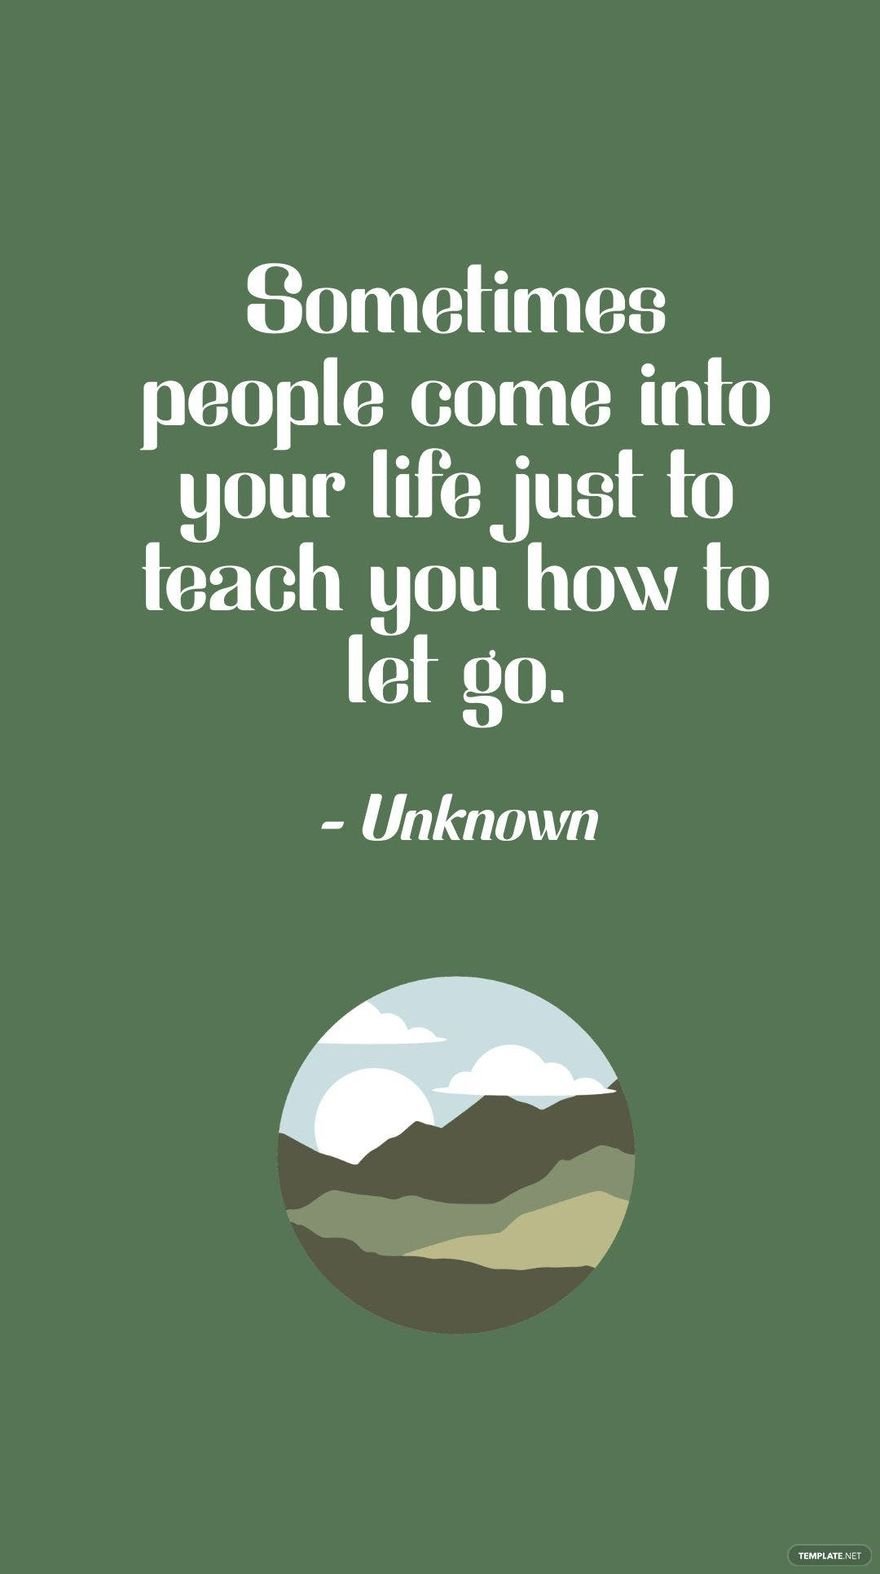 Unknown - Sometimes people come into your life just to teach you how to let go.